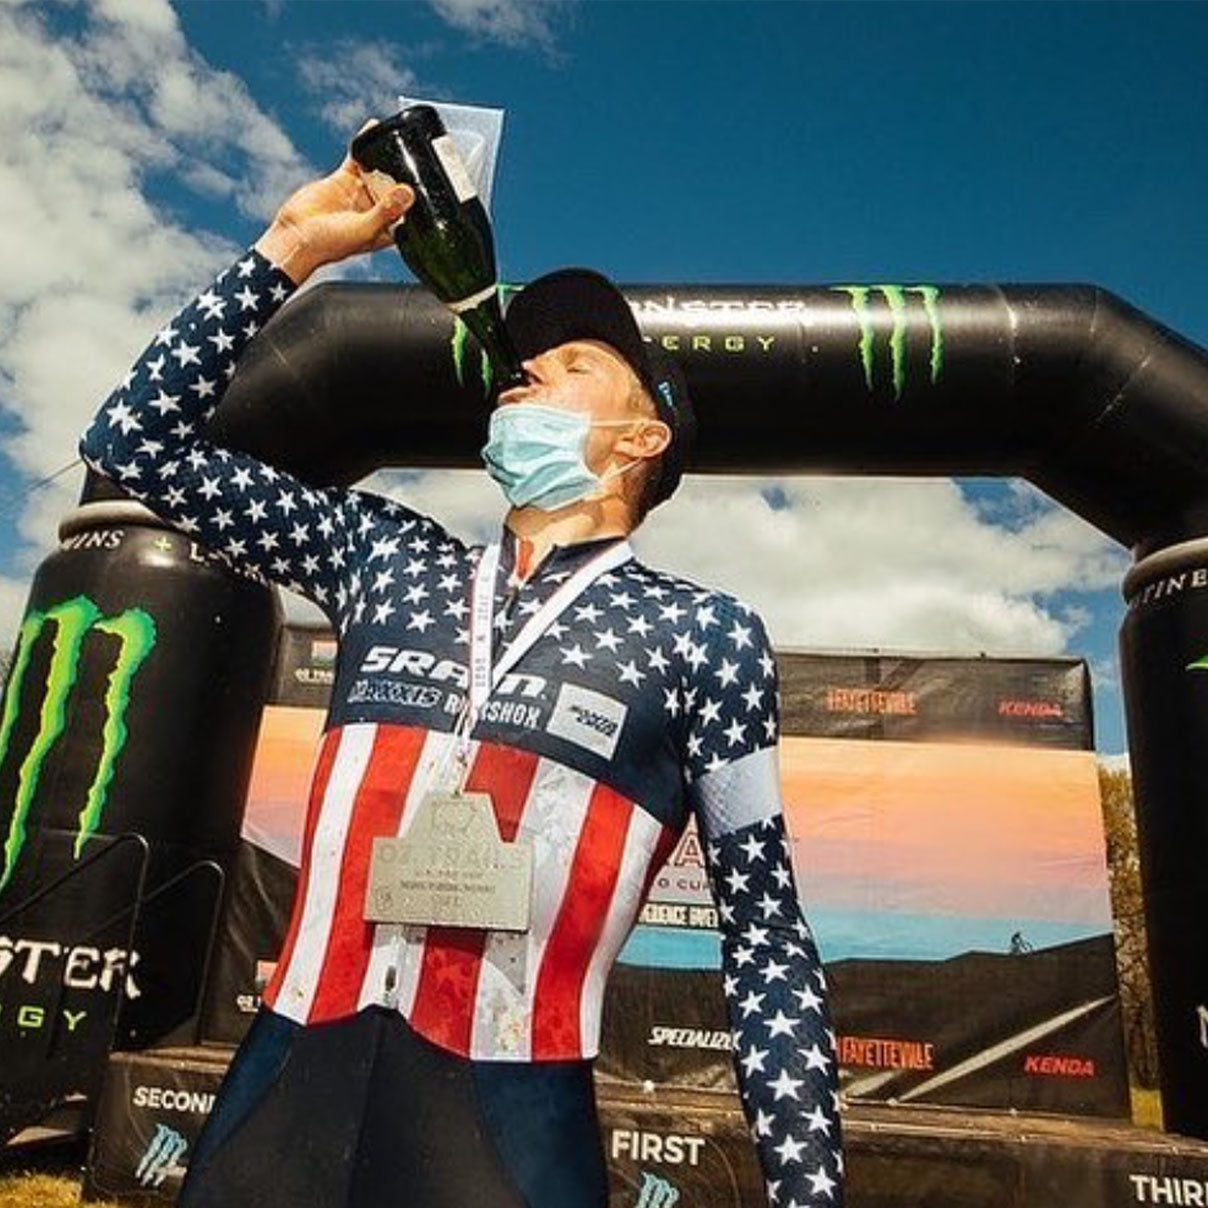 short track and XCO champ kit Keegan wears while celebrating a win